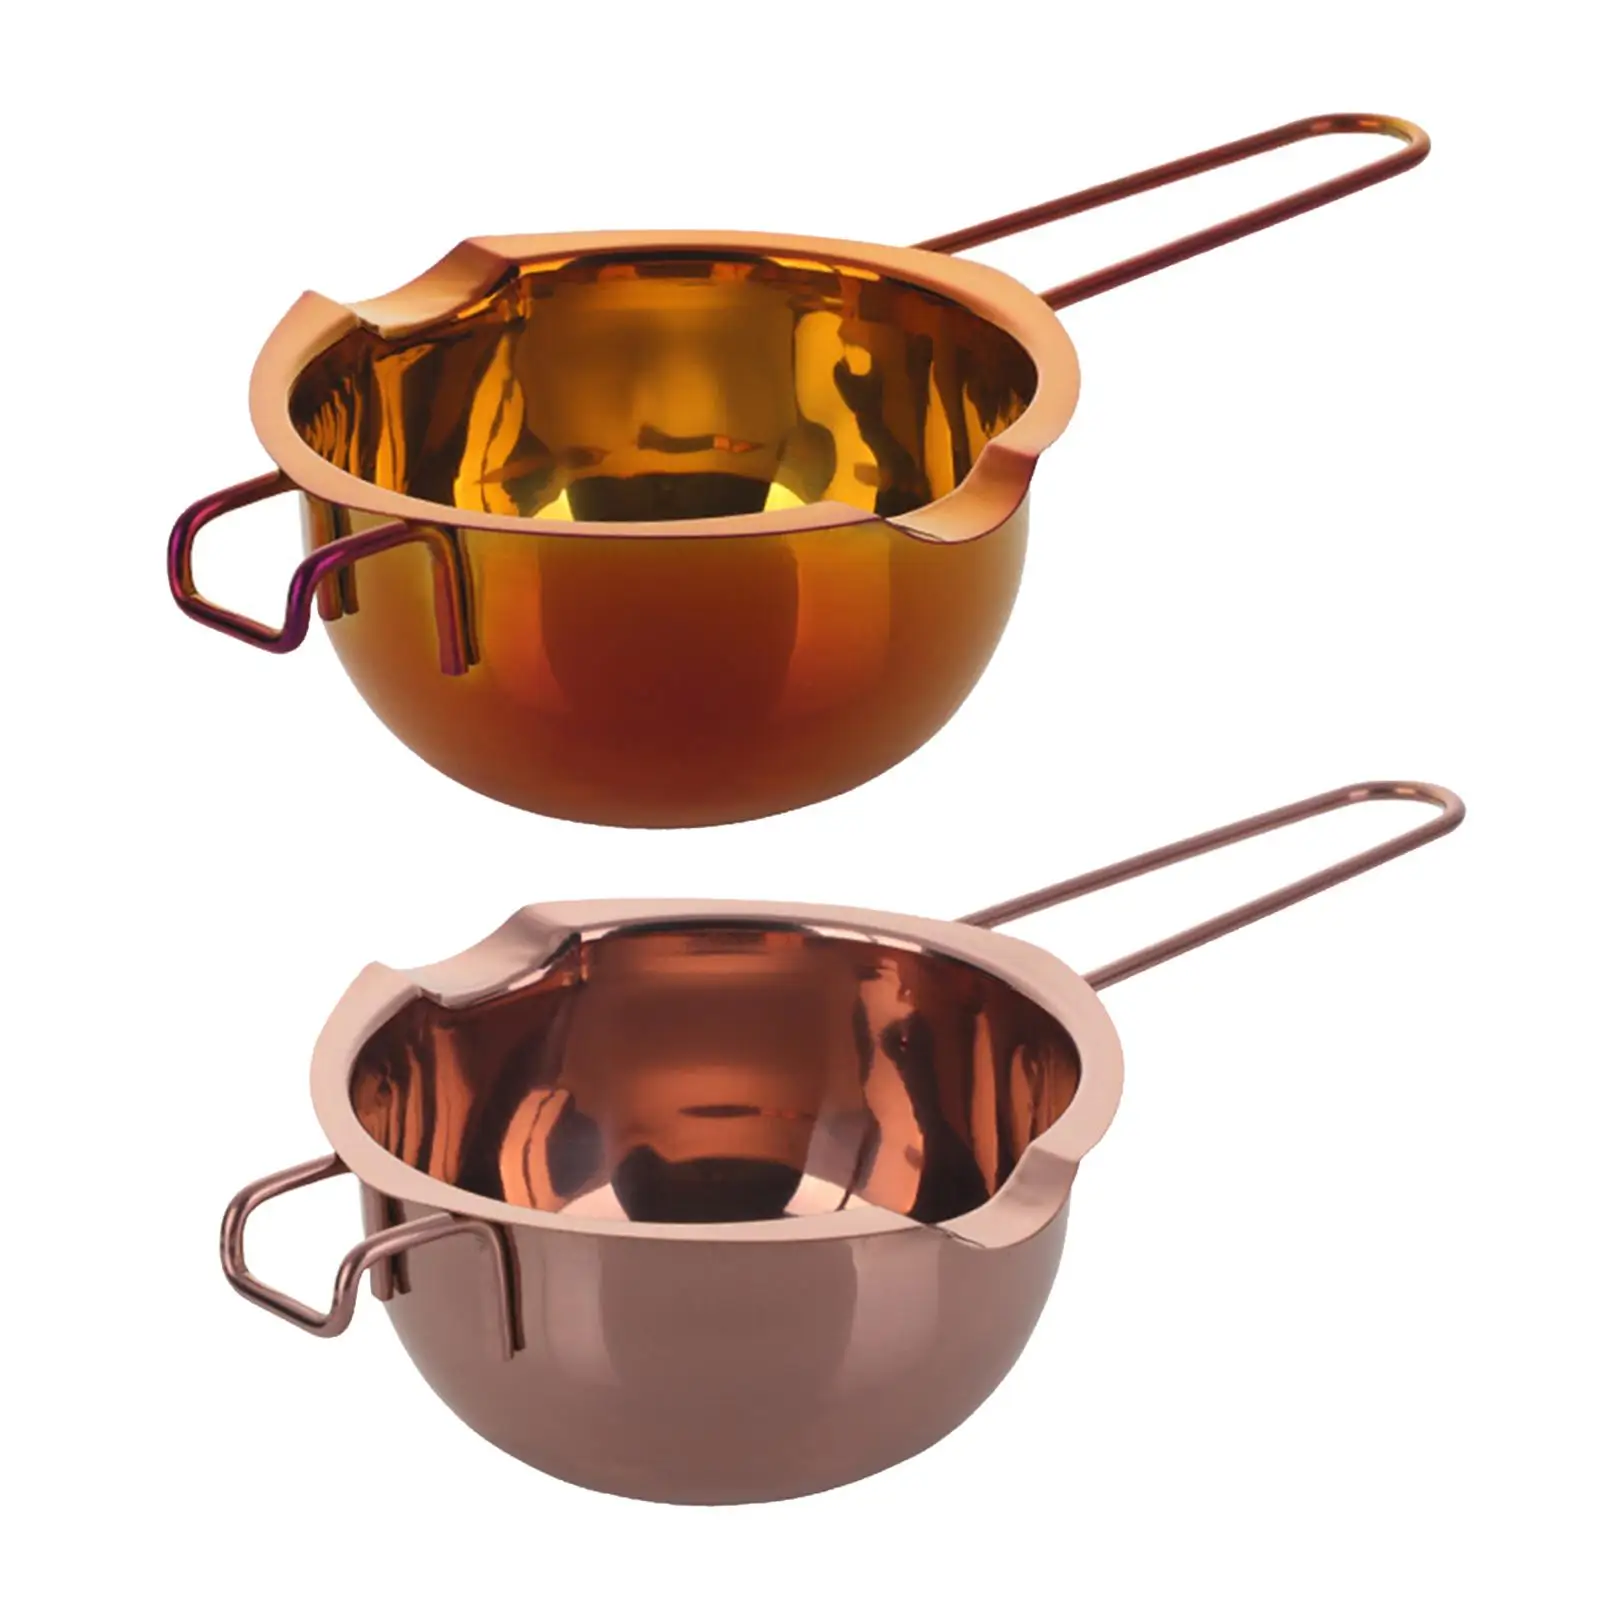 Stainless Steel Double Boiler Metls Pot 400ml for Melting Chocolate 13.4oz